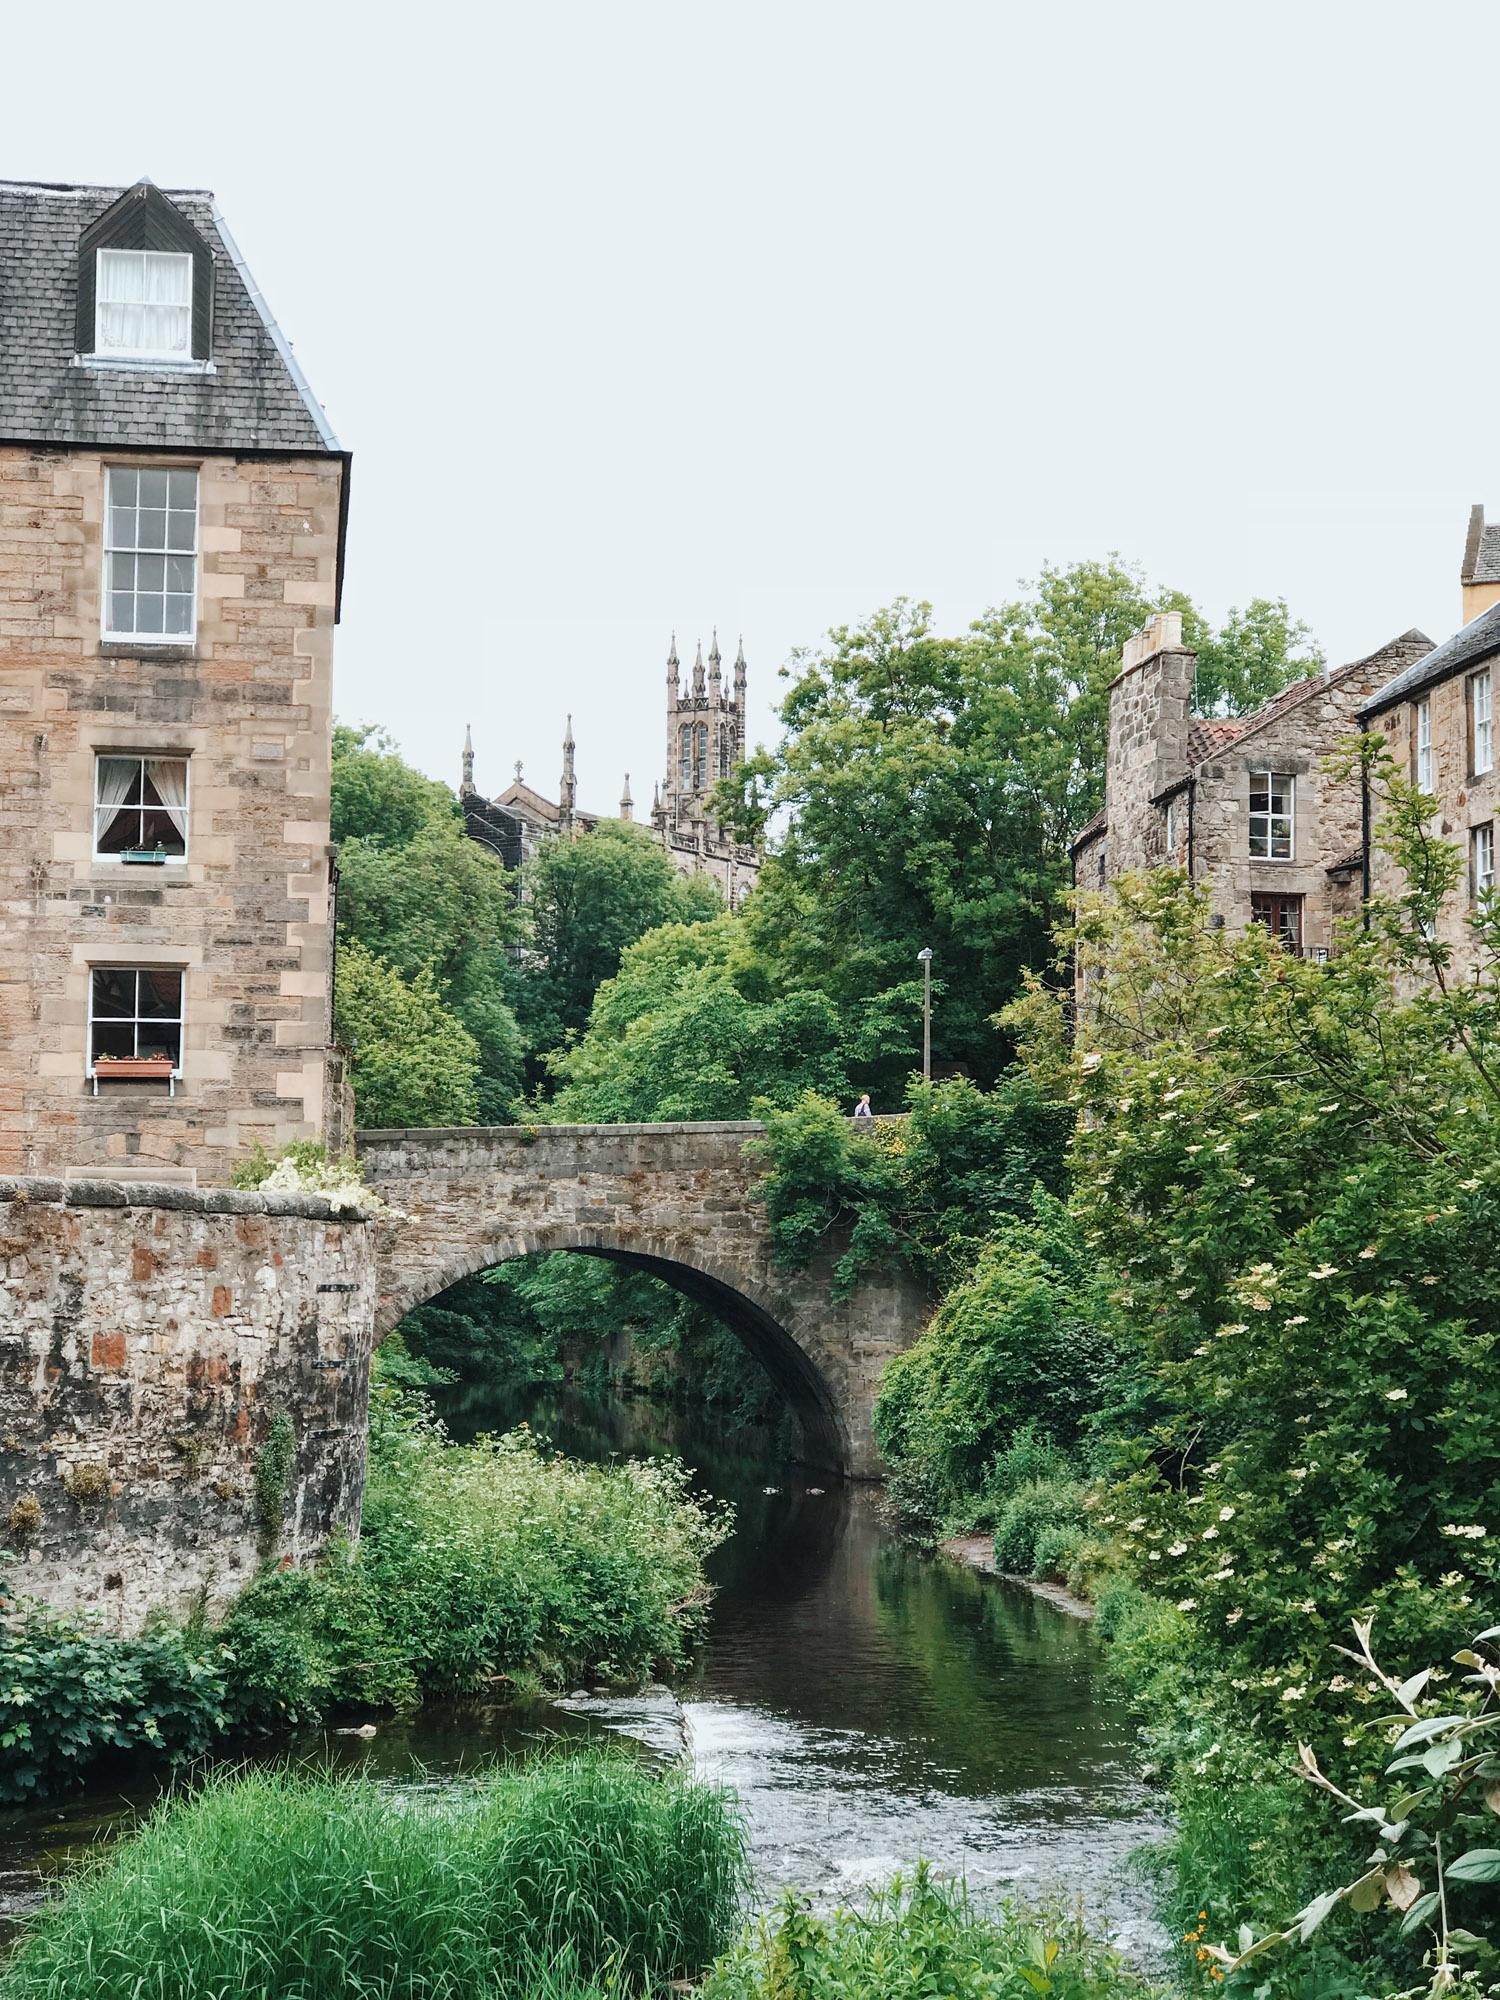 The picturesque Water of Leith